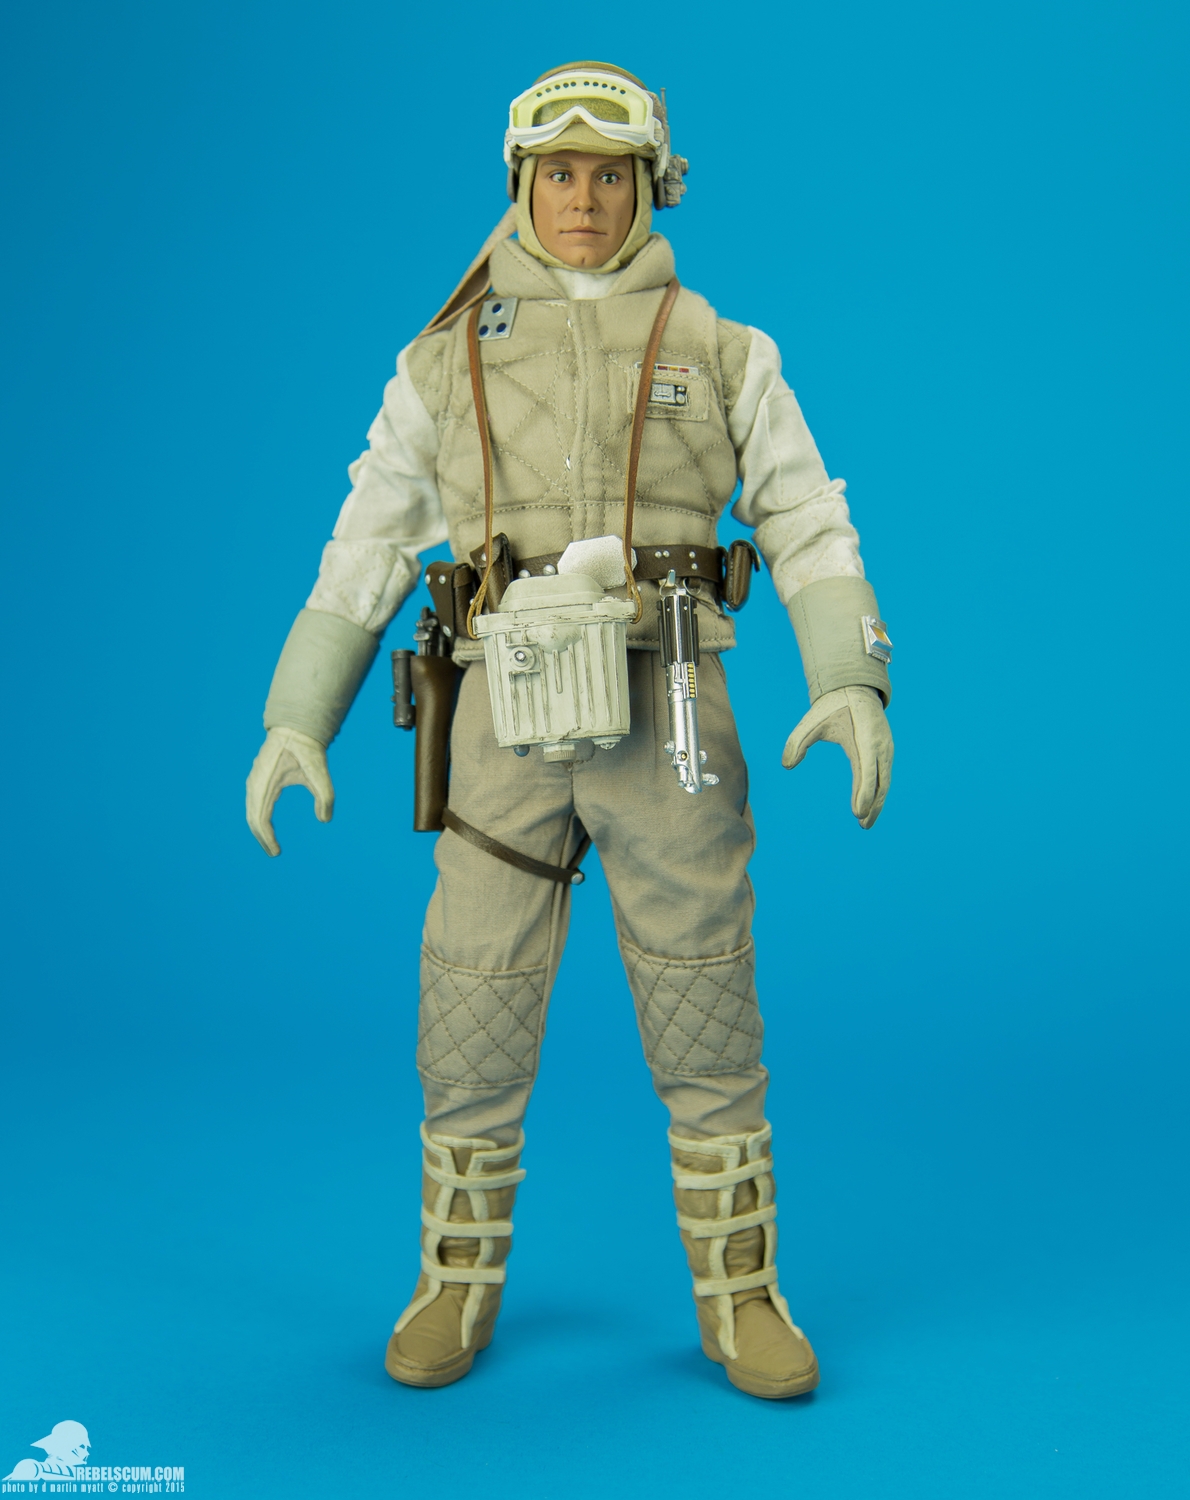 Luke-Skywalker-Hoth-Sixth-Scale-Sideshow-Collectibles-Star-Wars-005.jpg